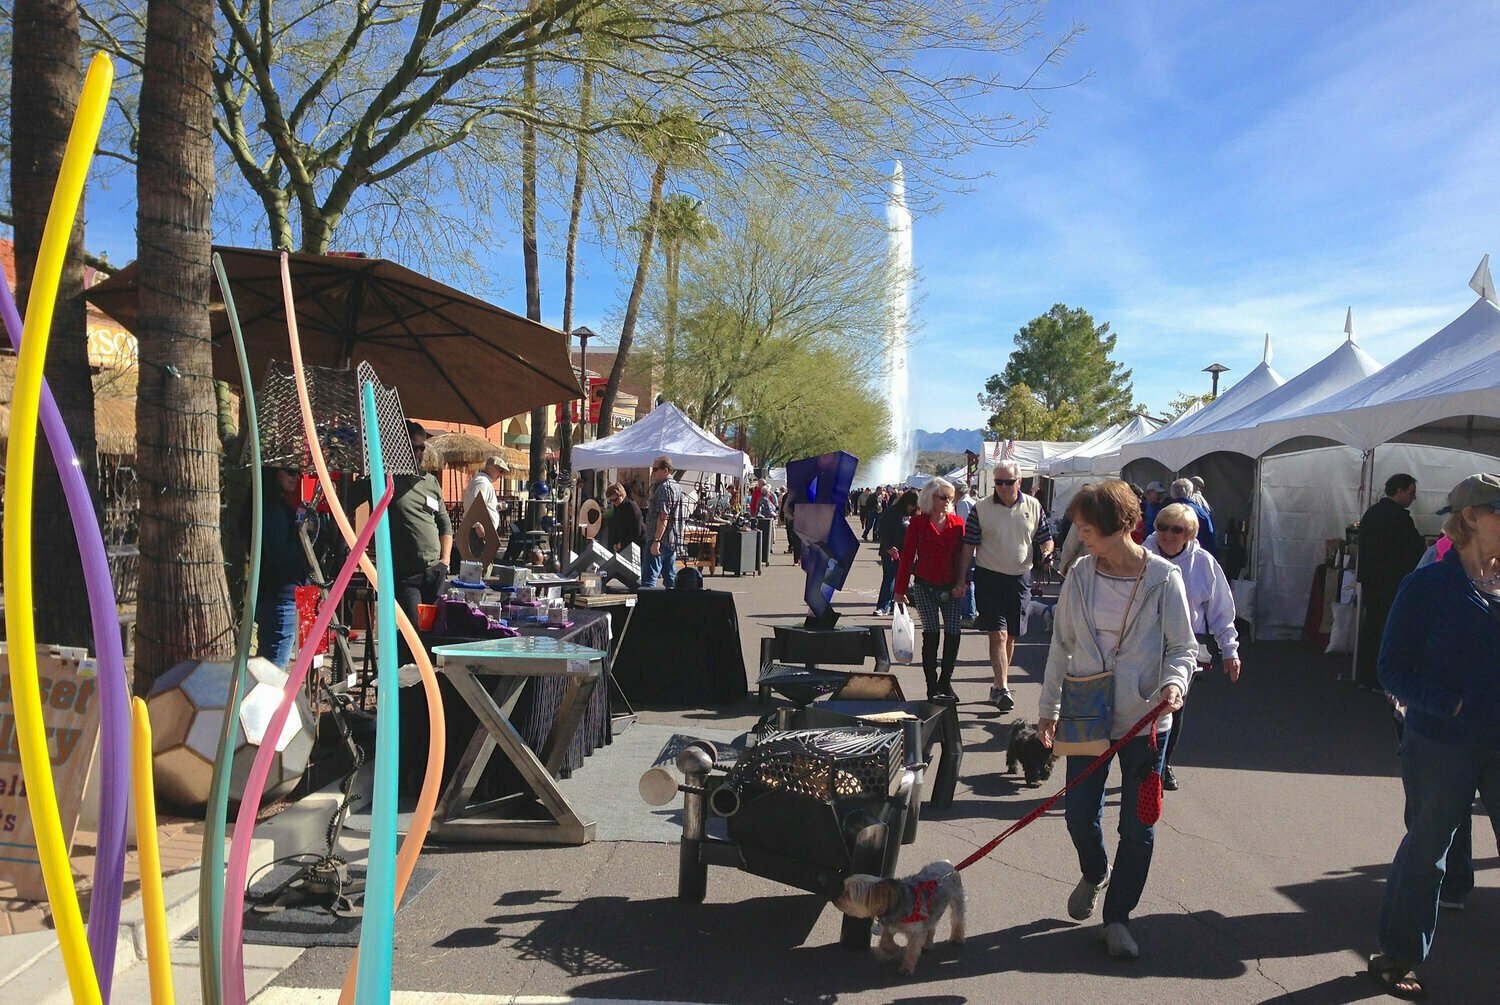 Celebrating its 50th year, the Fountain Festival of Fine Arts and Crafts is set for Feb. 23-25 along the Avenue of the Fountains.